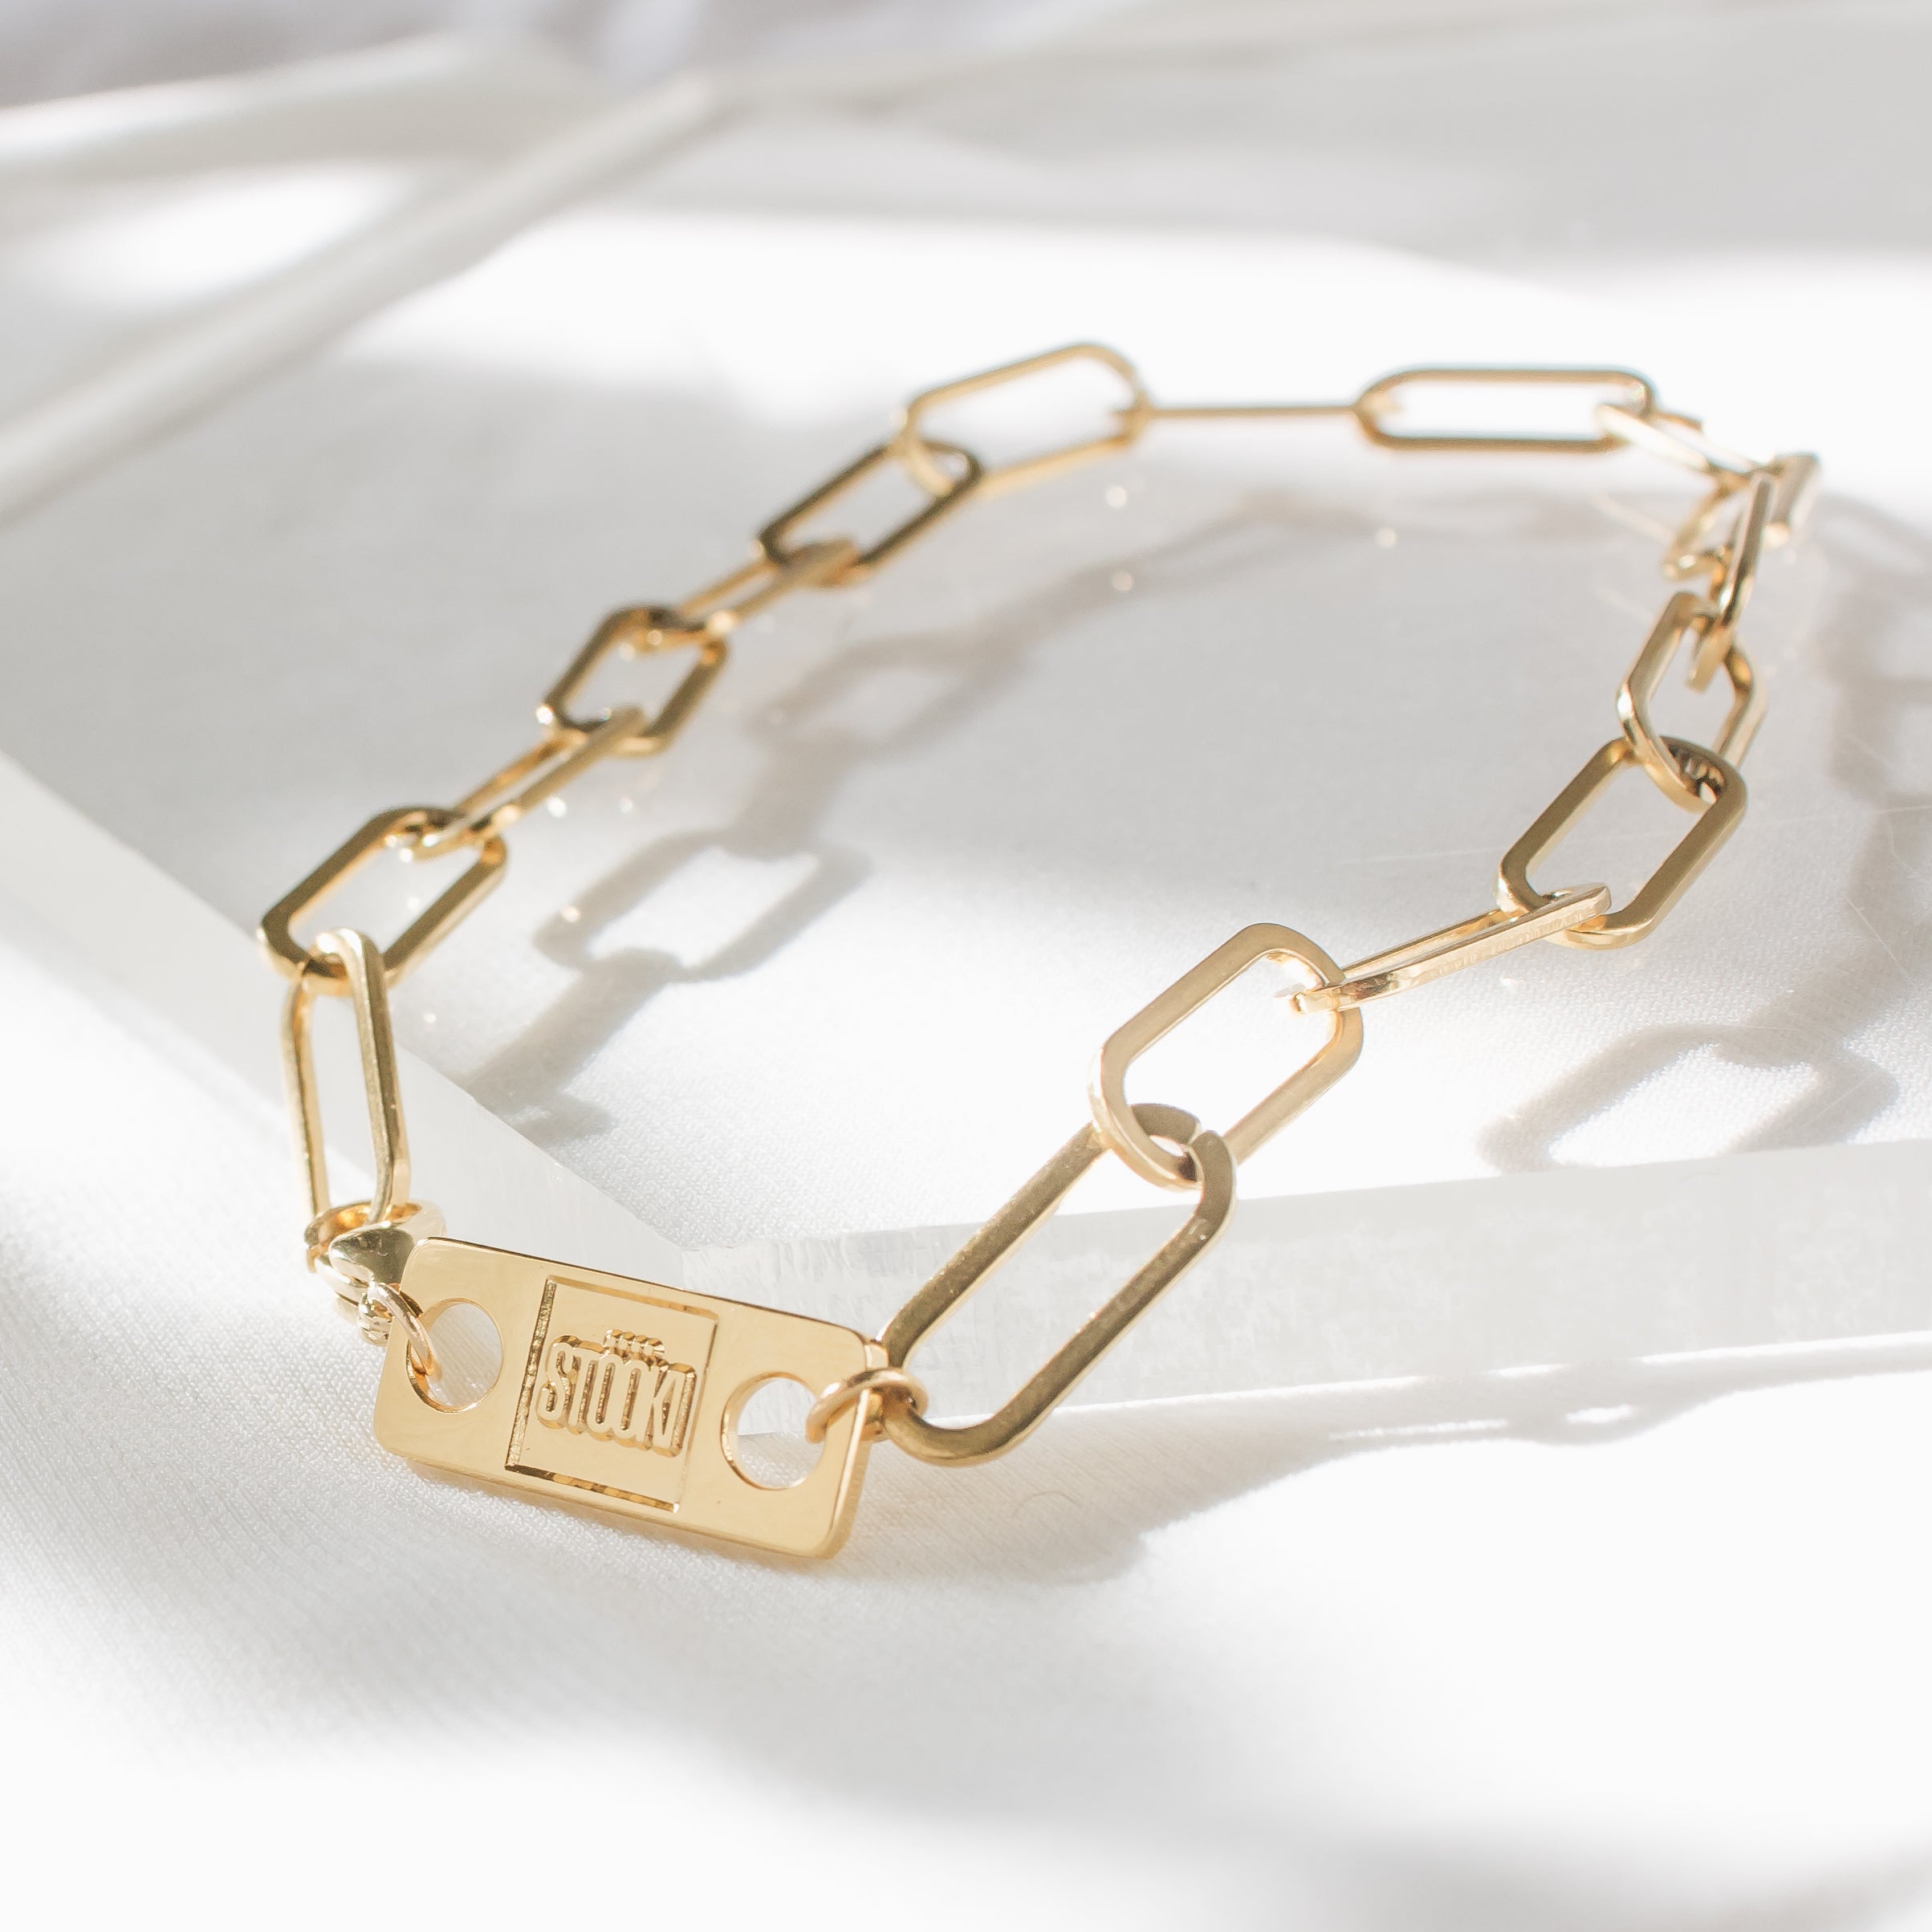 CONNECTION Necklace - Gold